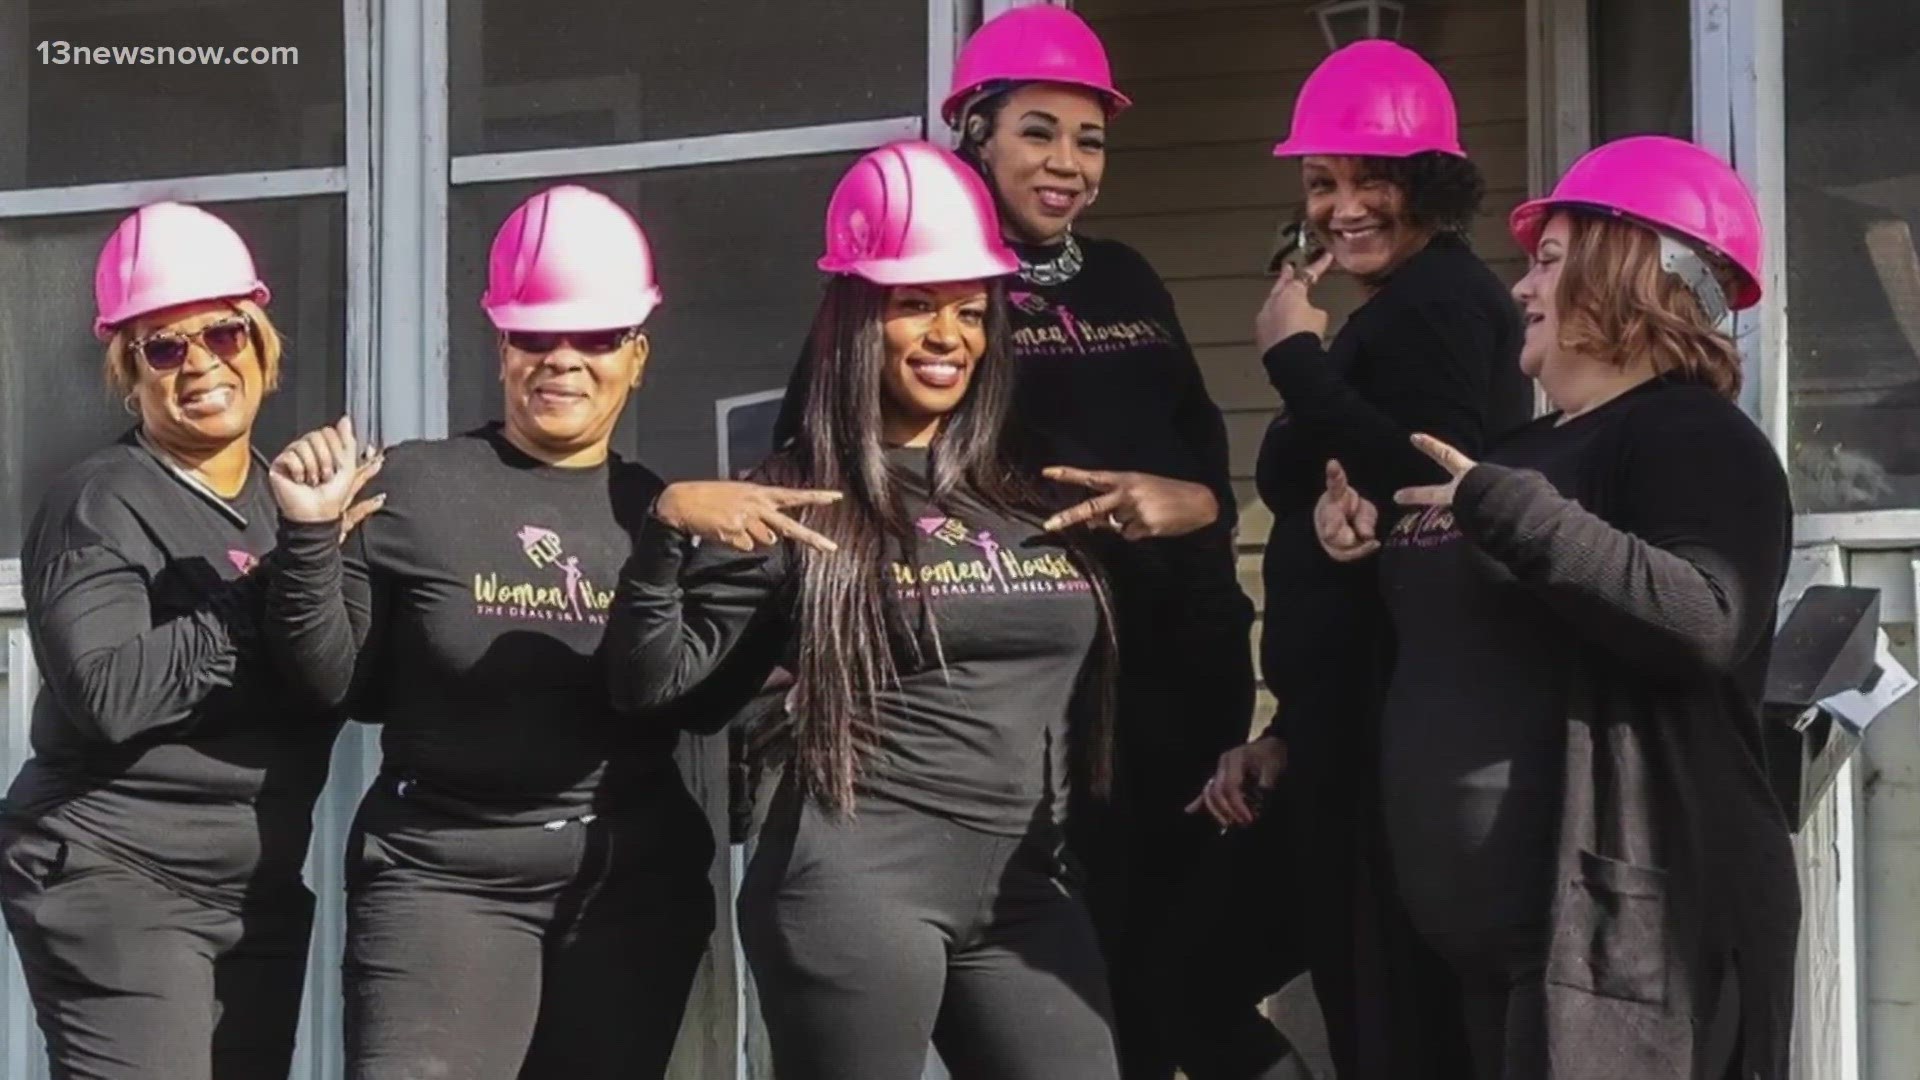 Women Flip Houses, Too is a coaching program that teaches women how to invest in real estate so that they can build wealth through real estate.